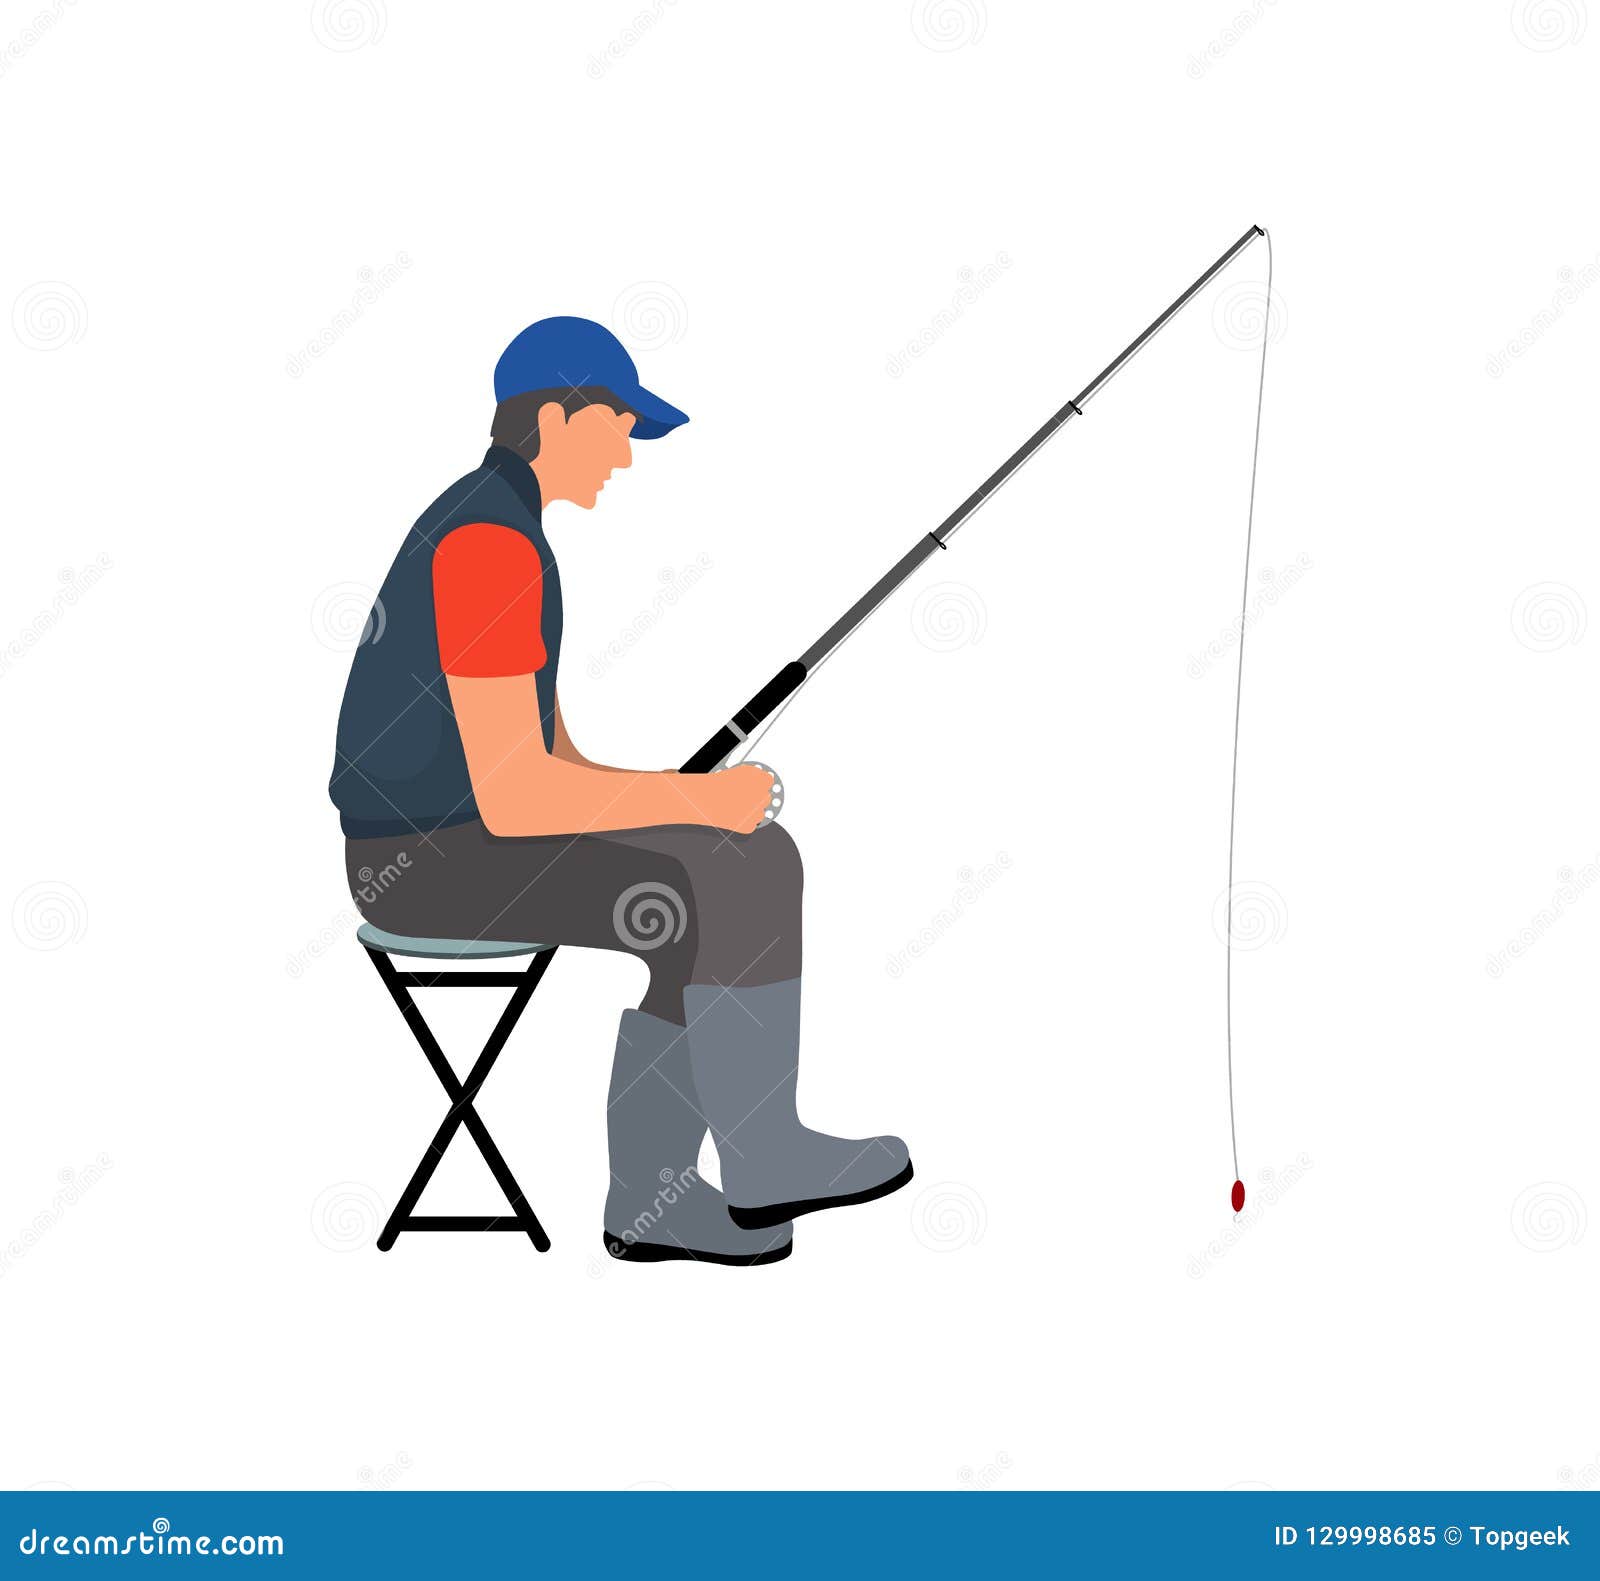 angler with fishing tackle waiting for fish poster